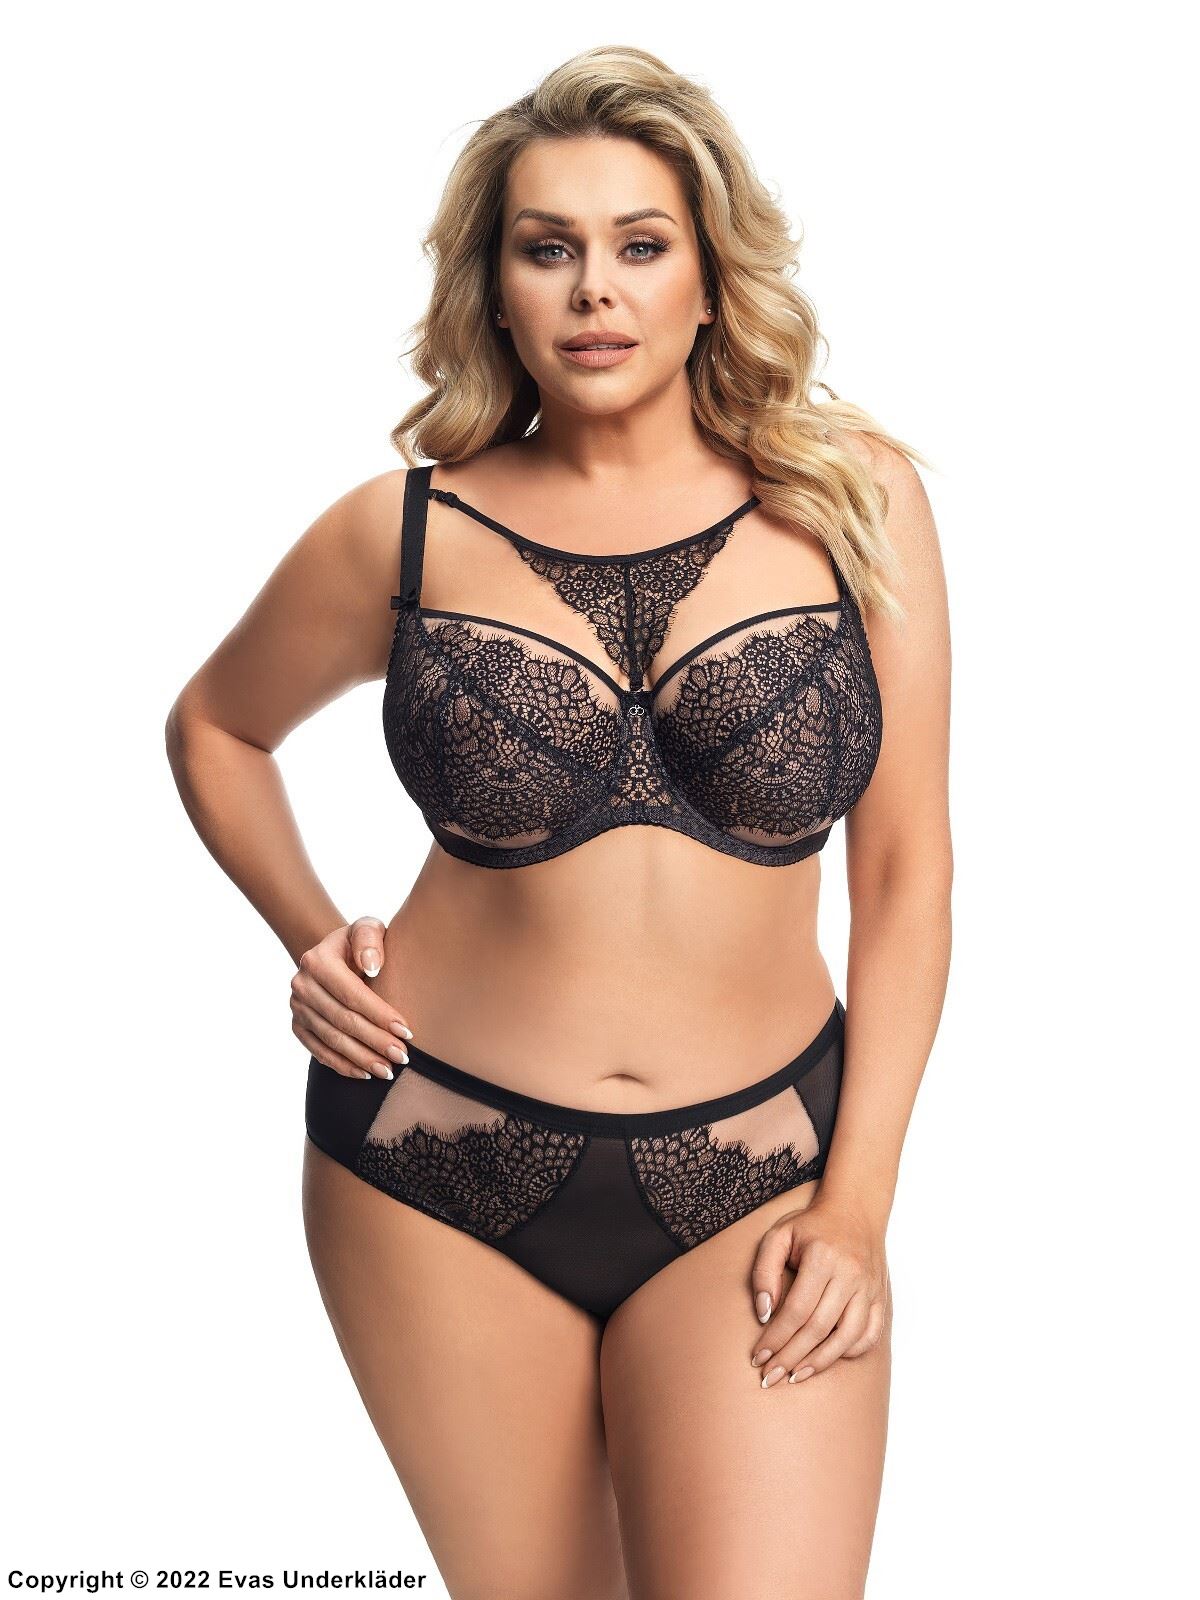 Romantic big cup bra, wide shoulder straps, partially sheer cups, luxurious lace, D to M-cup